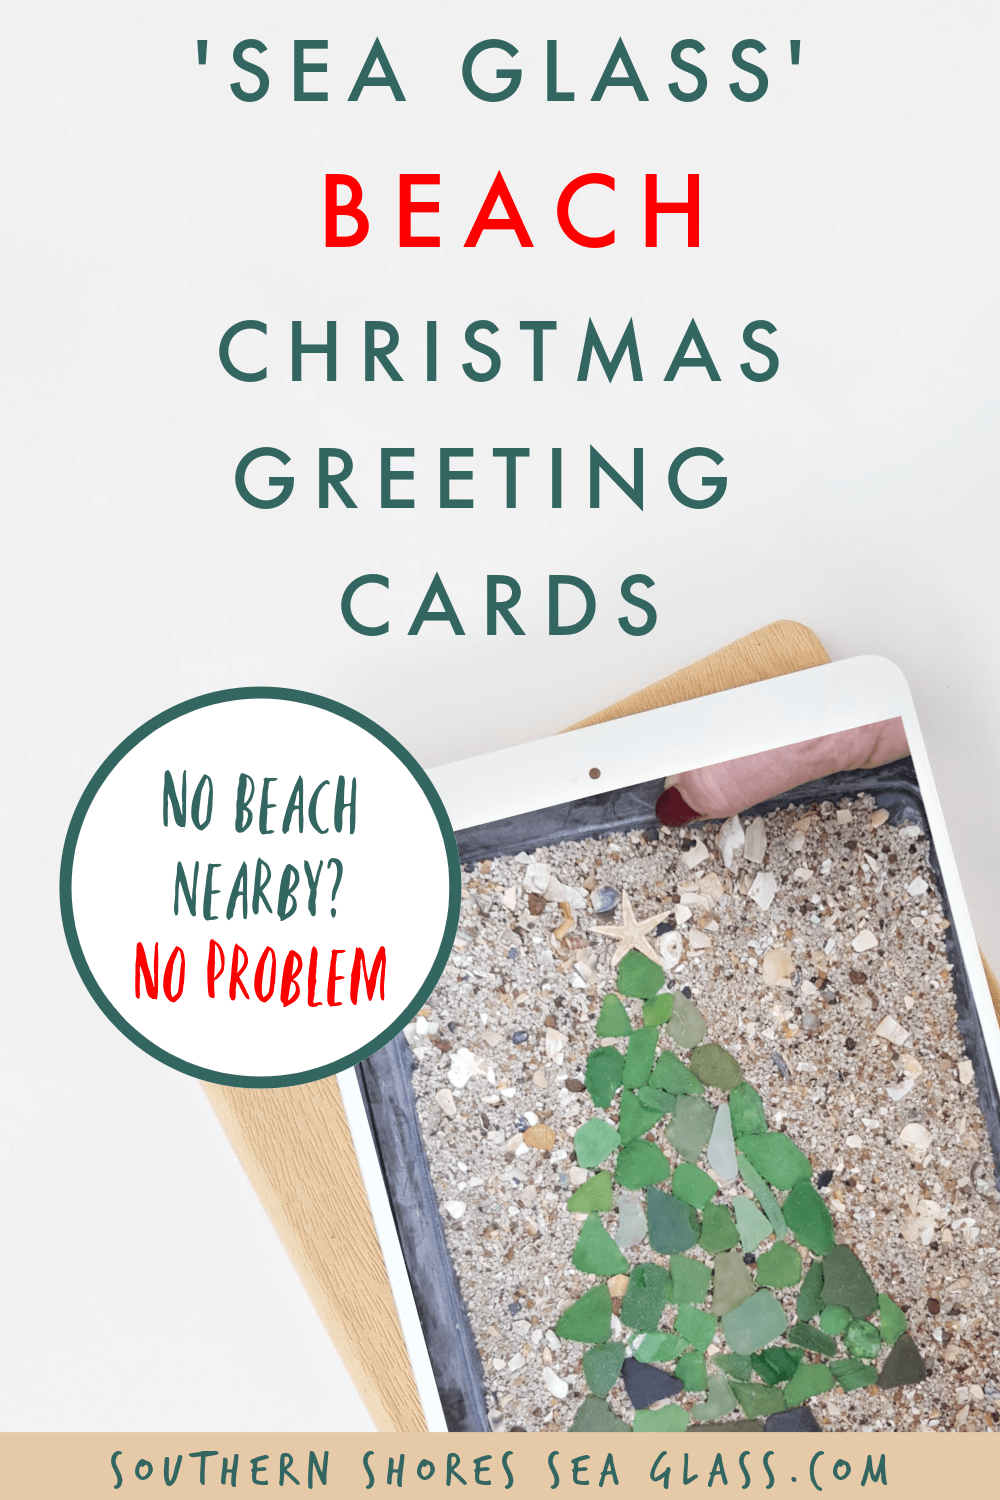 Create your own Beach Christmas Greeting Cards for friends and family using your own photos and personally collected sea glass